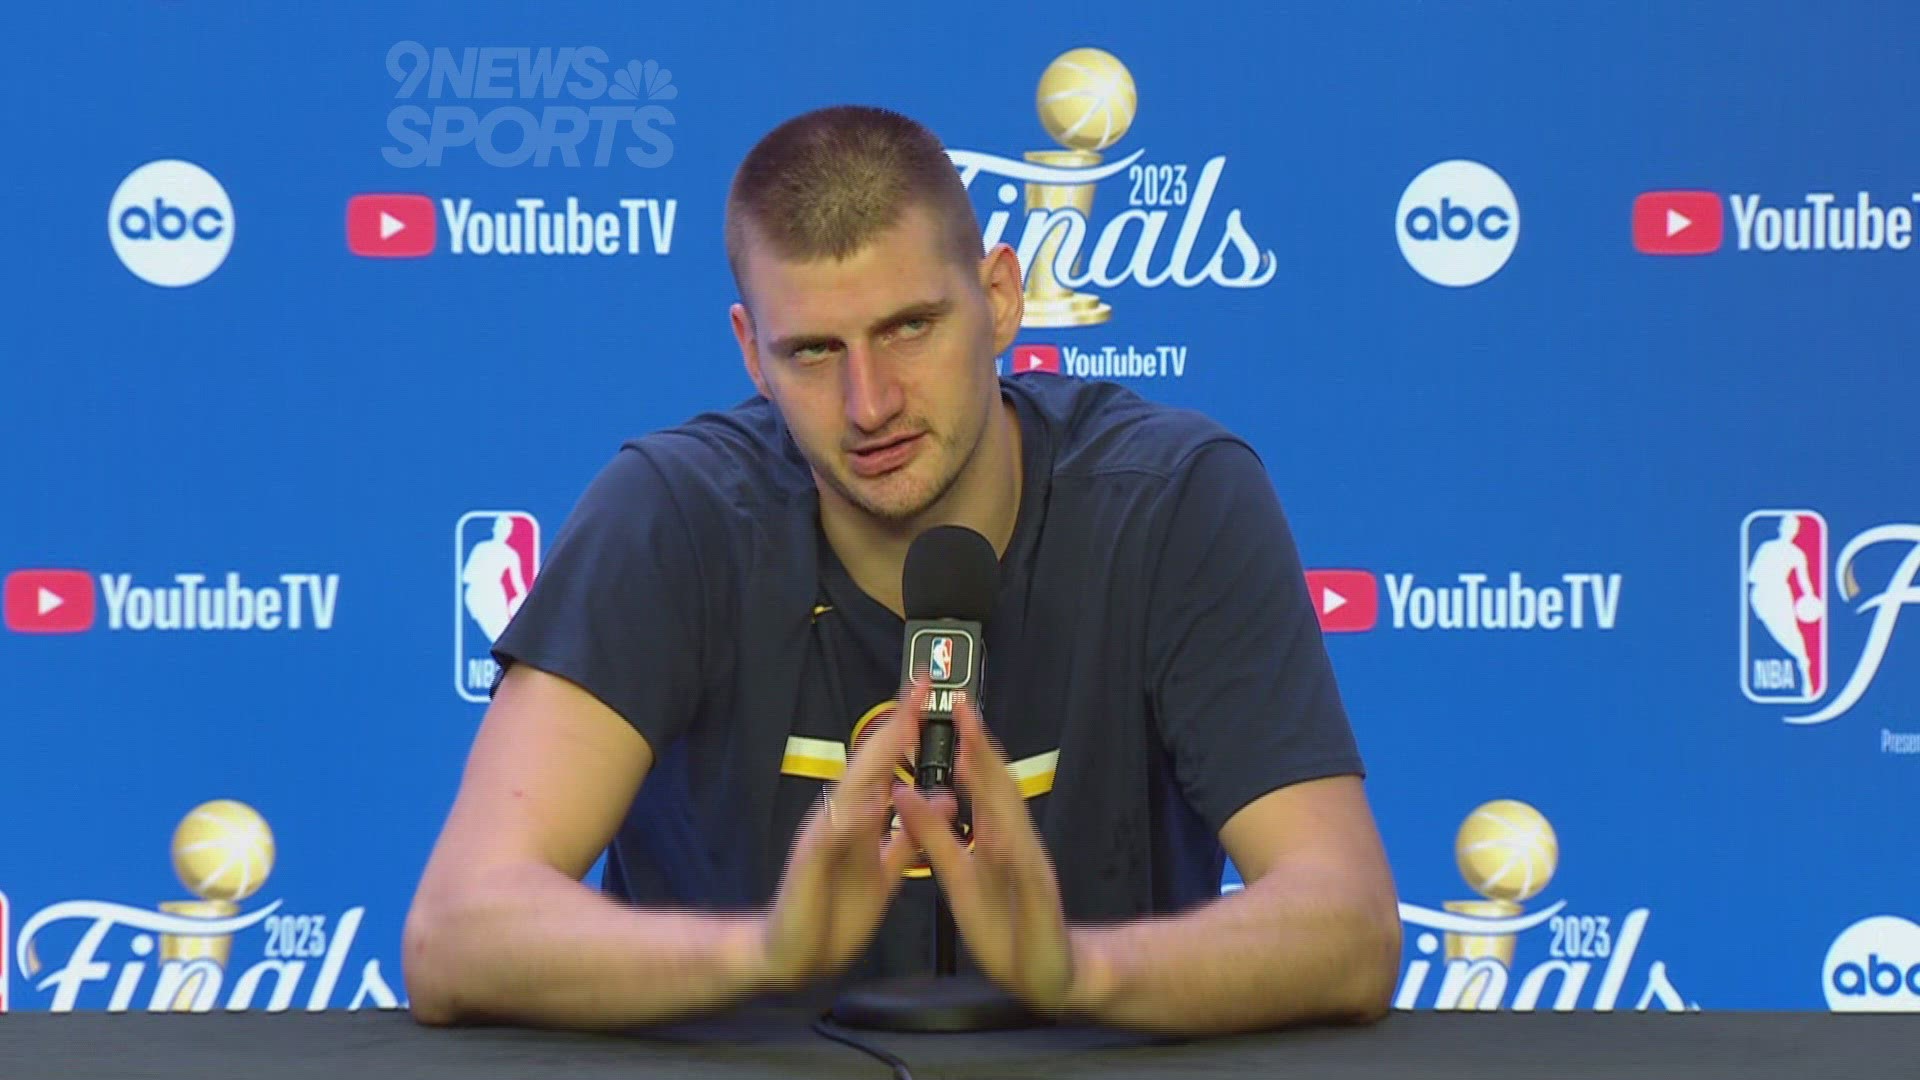 There are no more holes in Nikola Jokic’s impressive resume after winning an NBA championship and being named Finals MVP.